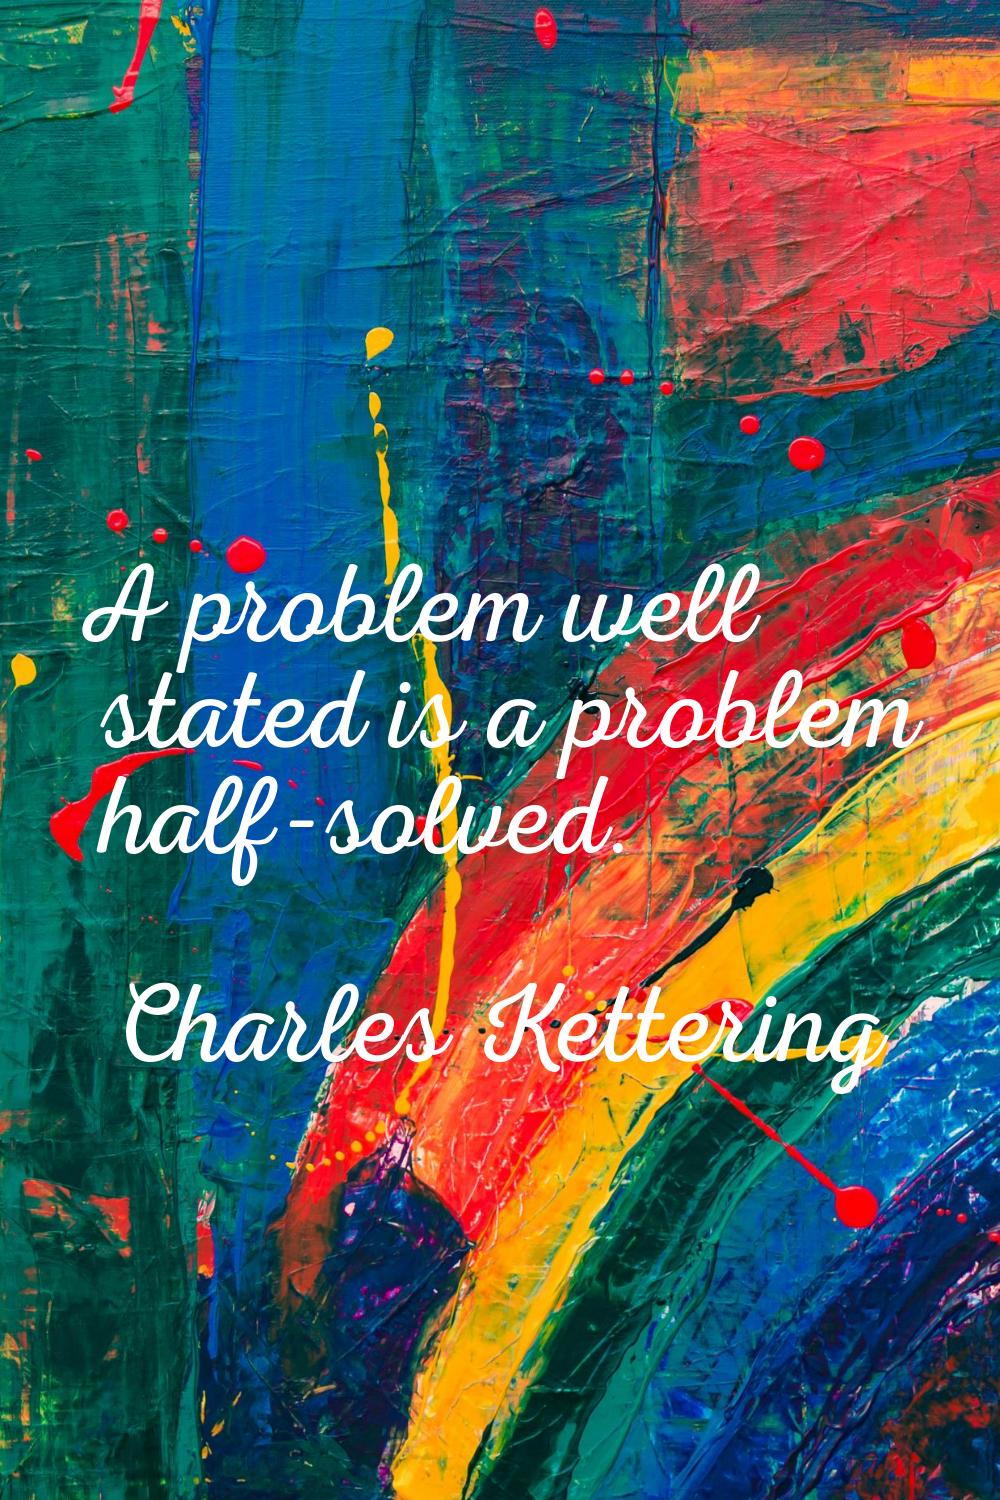 A problem well stated is a problem half-solved.